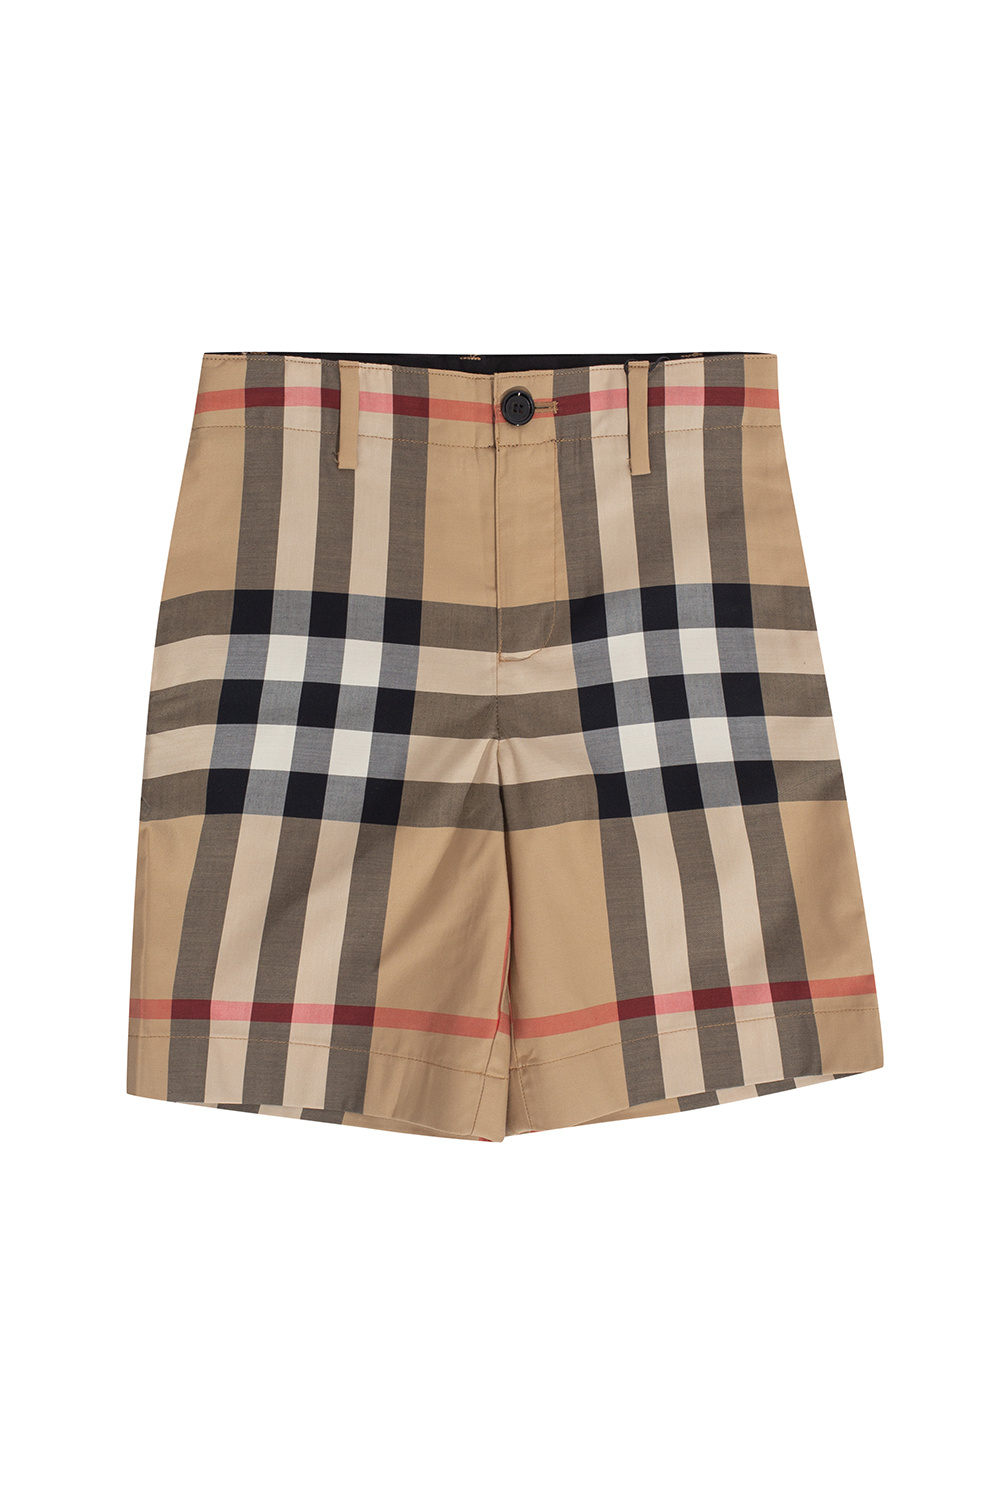 burberry large Kids Checked shorts